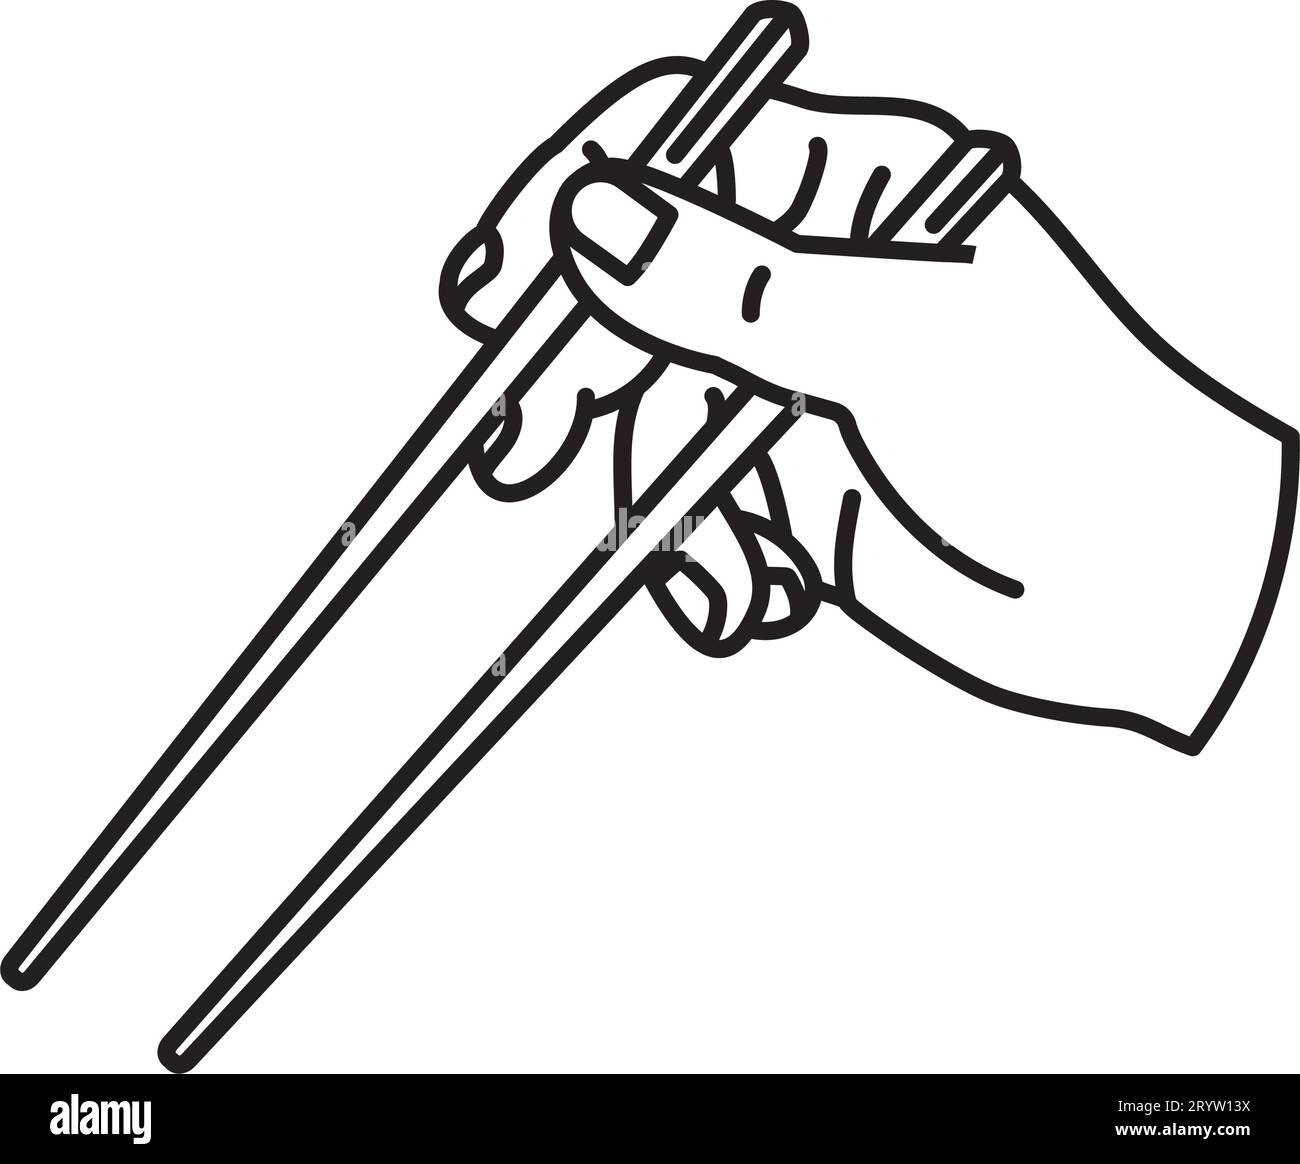 Human hand holding chopsticks vector line icon for National Chopsticks Day on February 6 Stock Vector